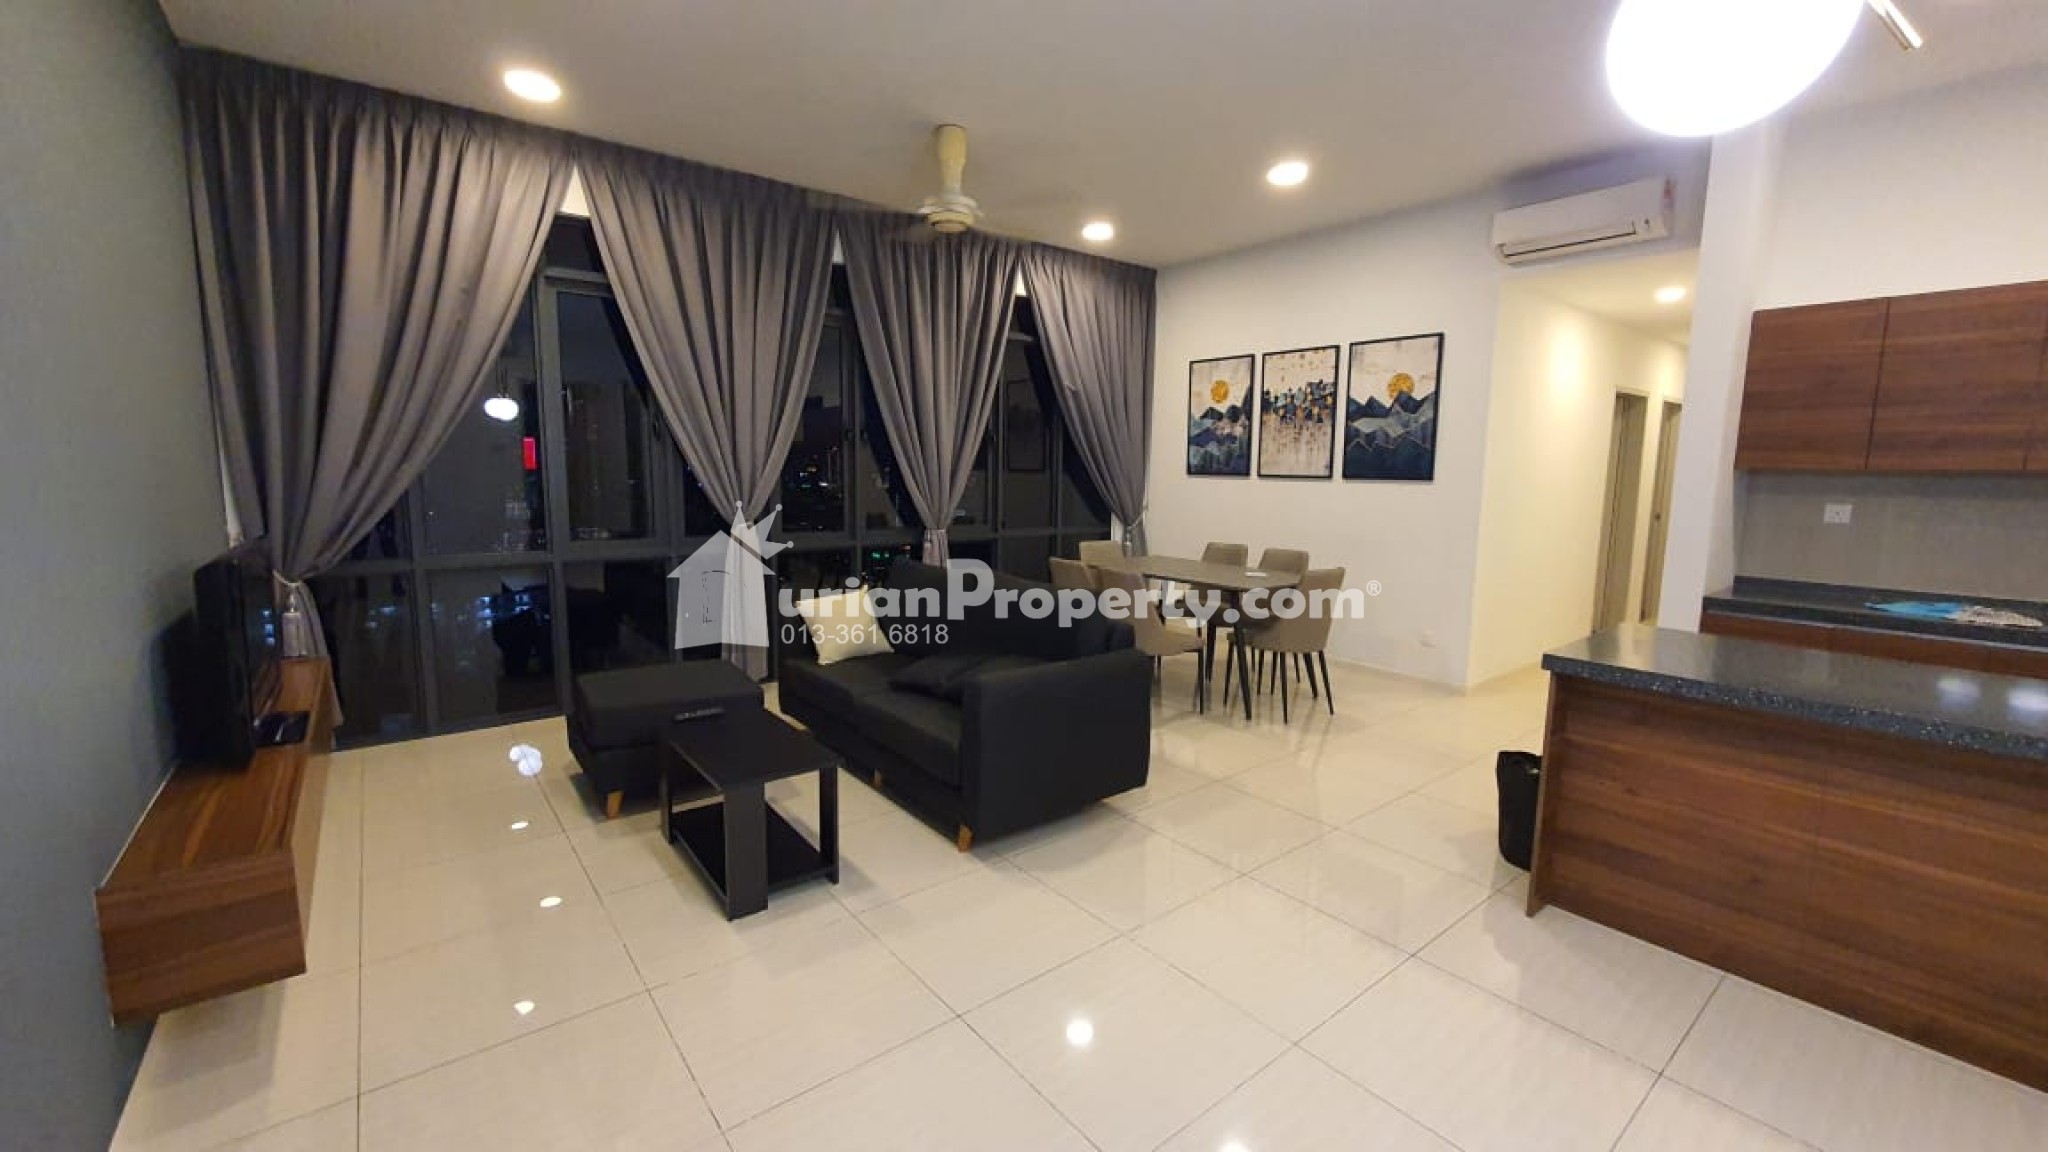 Condo For Rent at Inwood Residences